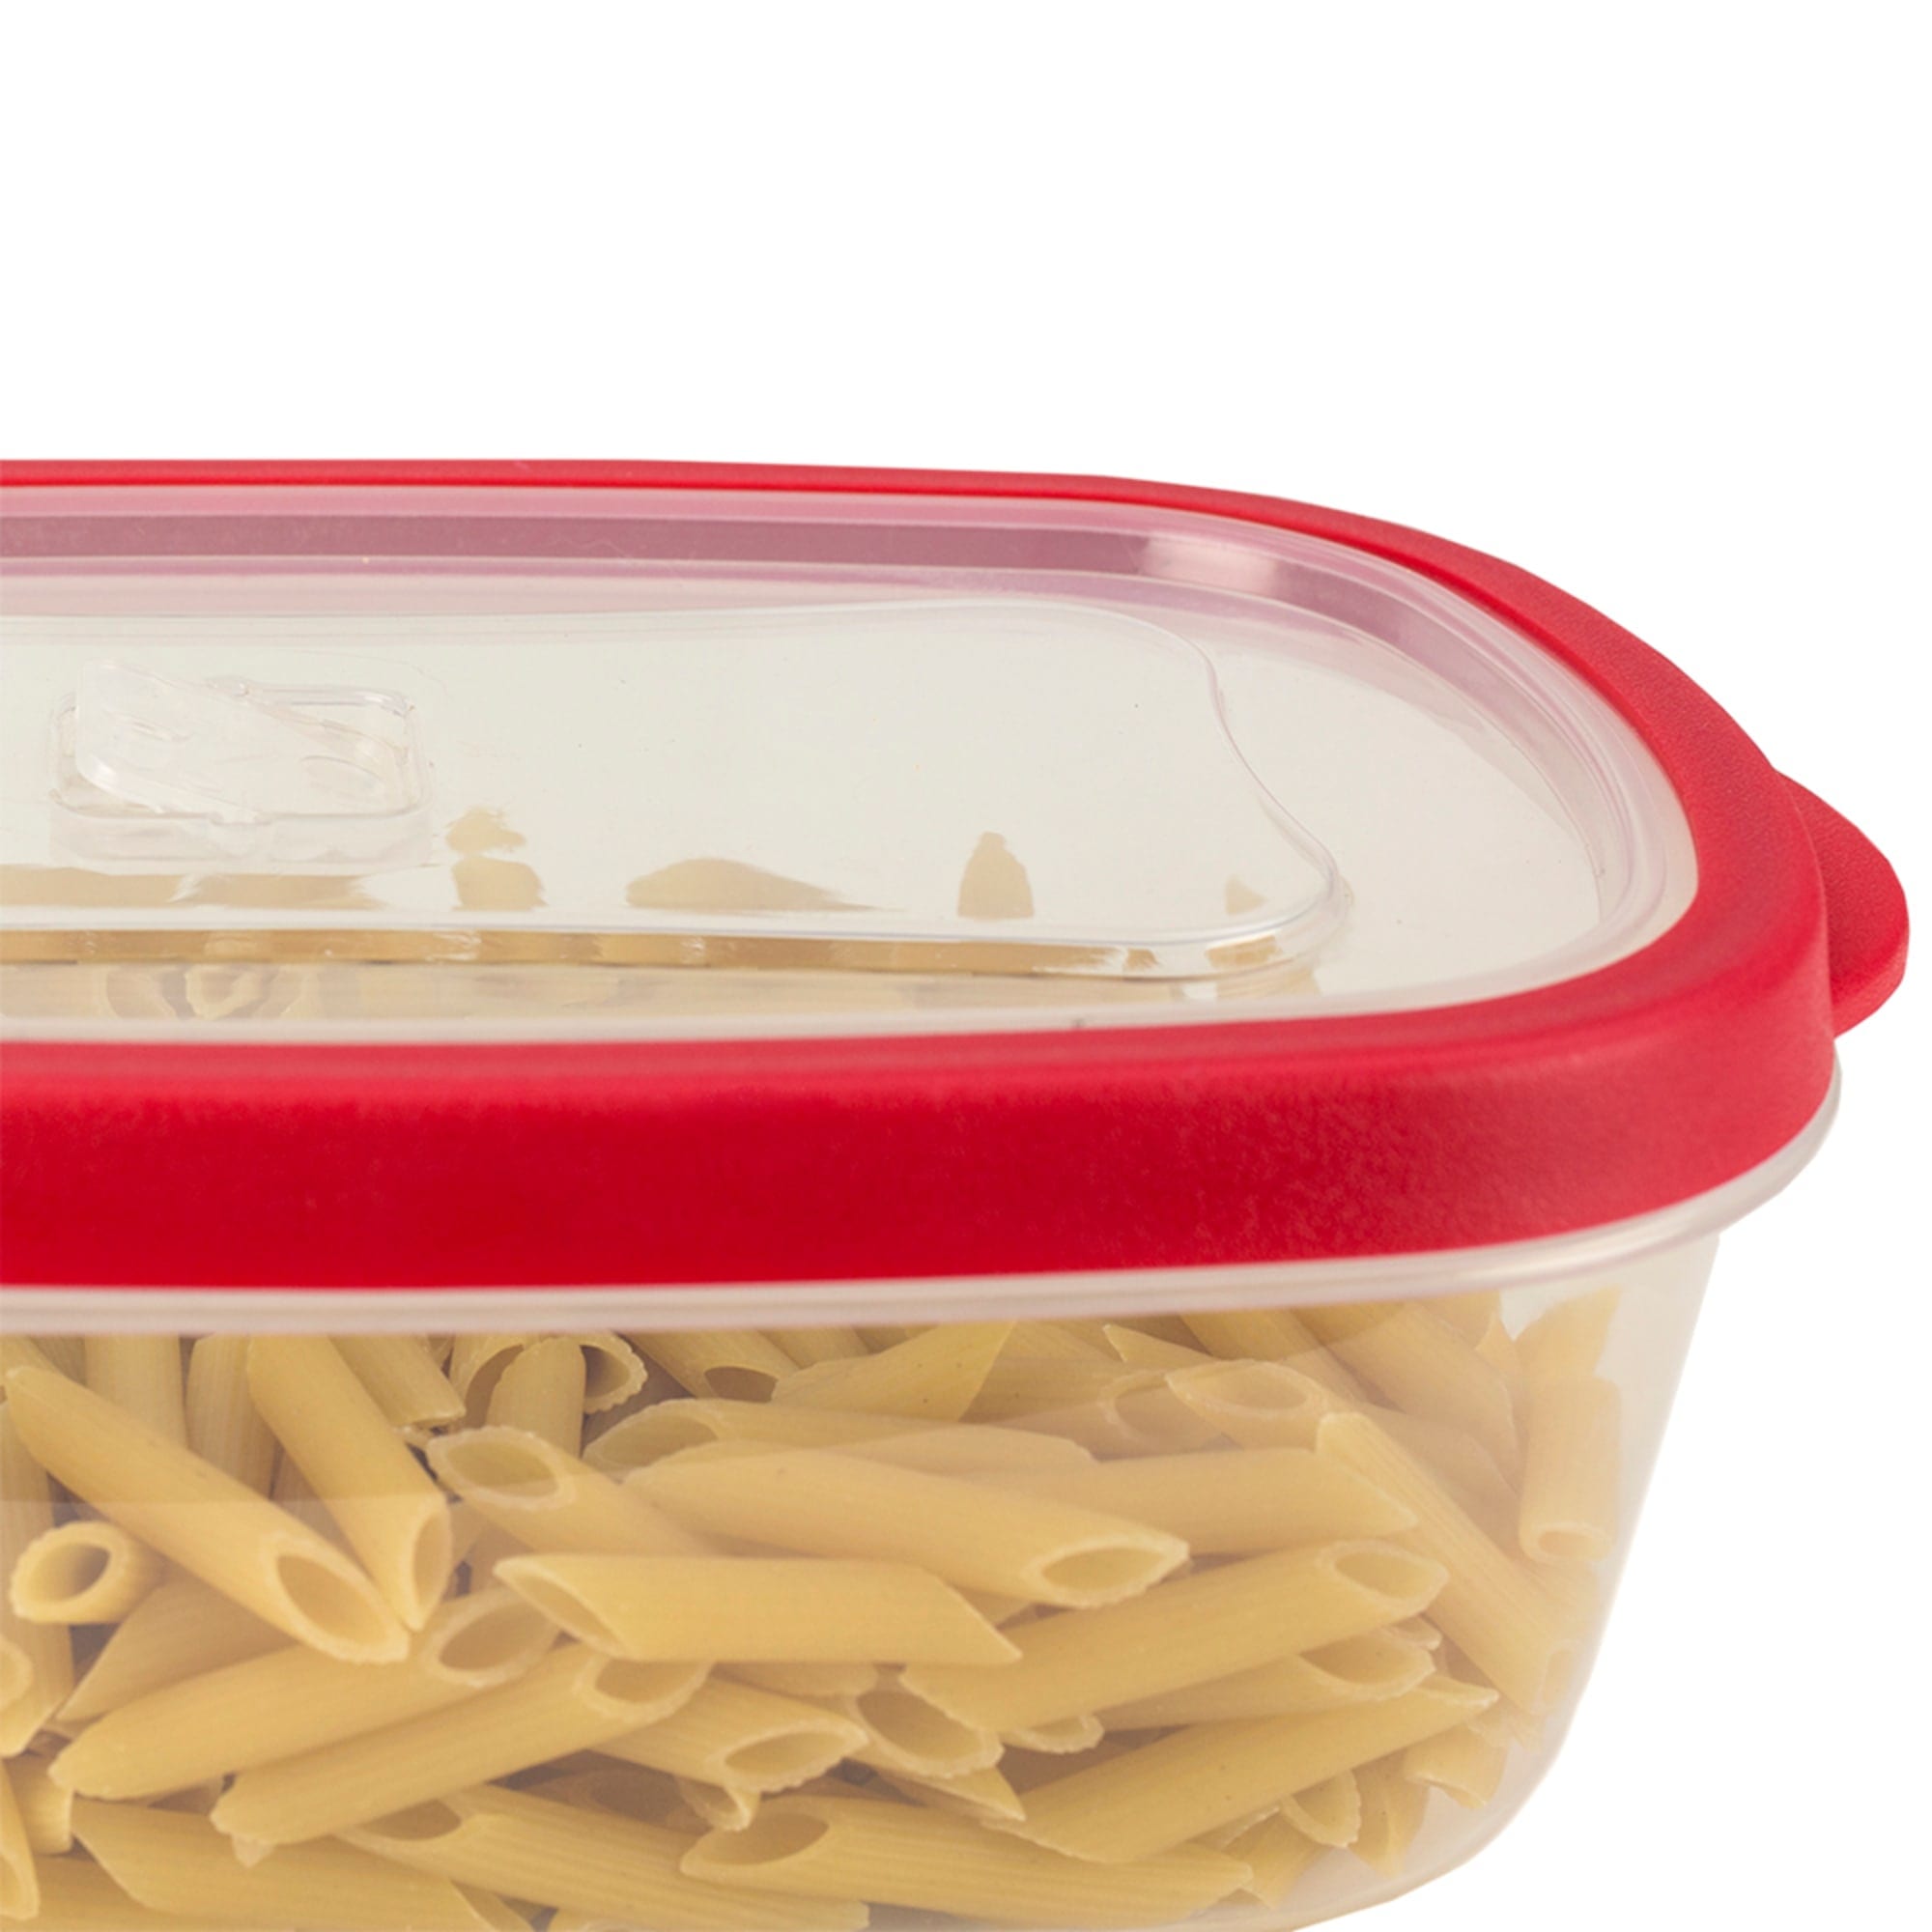 Rubbermaid 2.5 Gal. Rectangle Easy Find Lids Container, Food Storage, Household